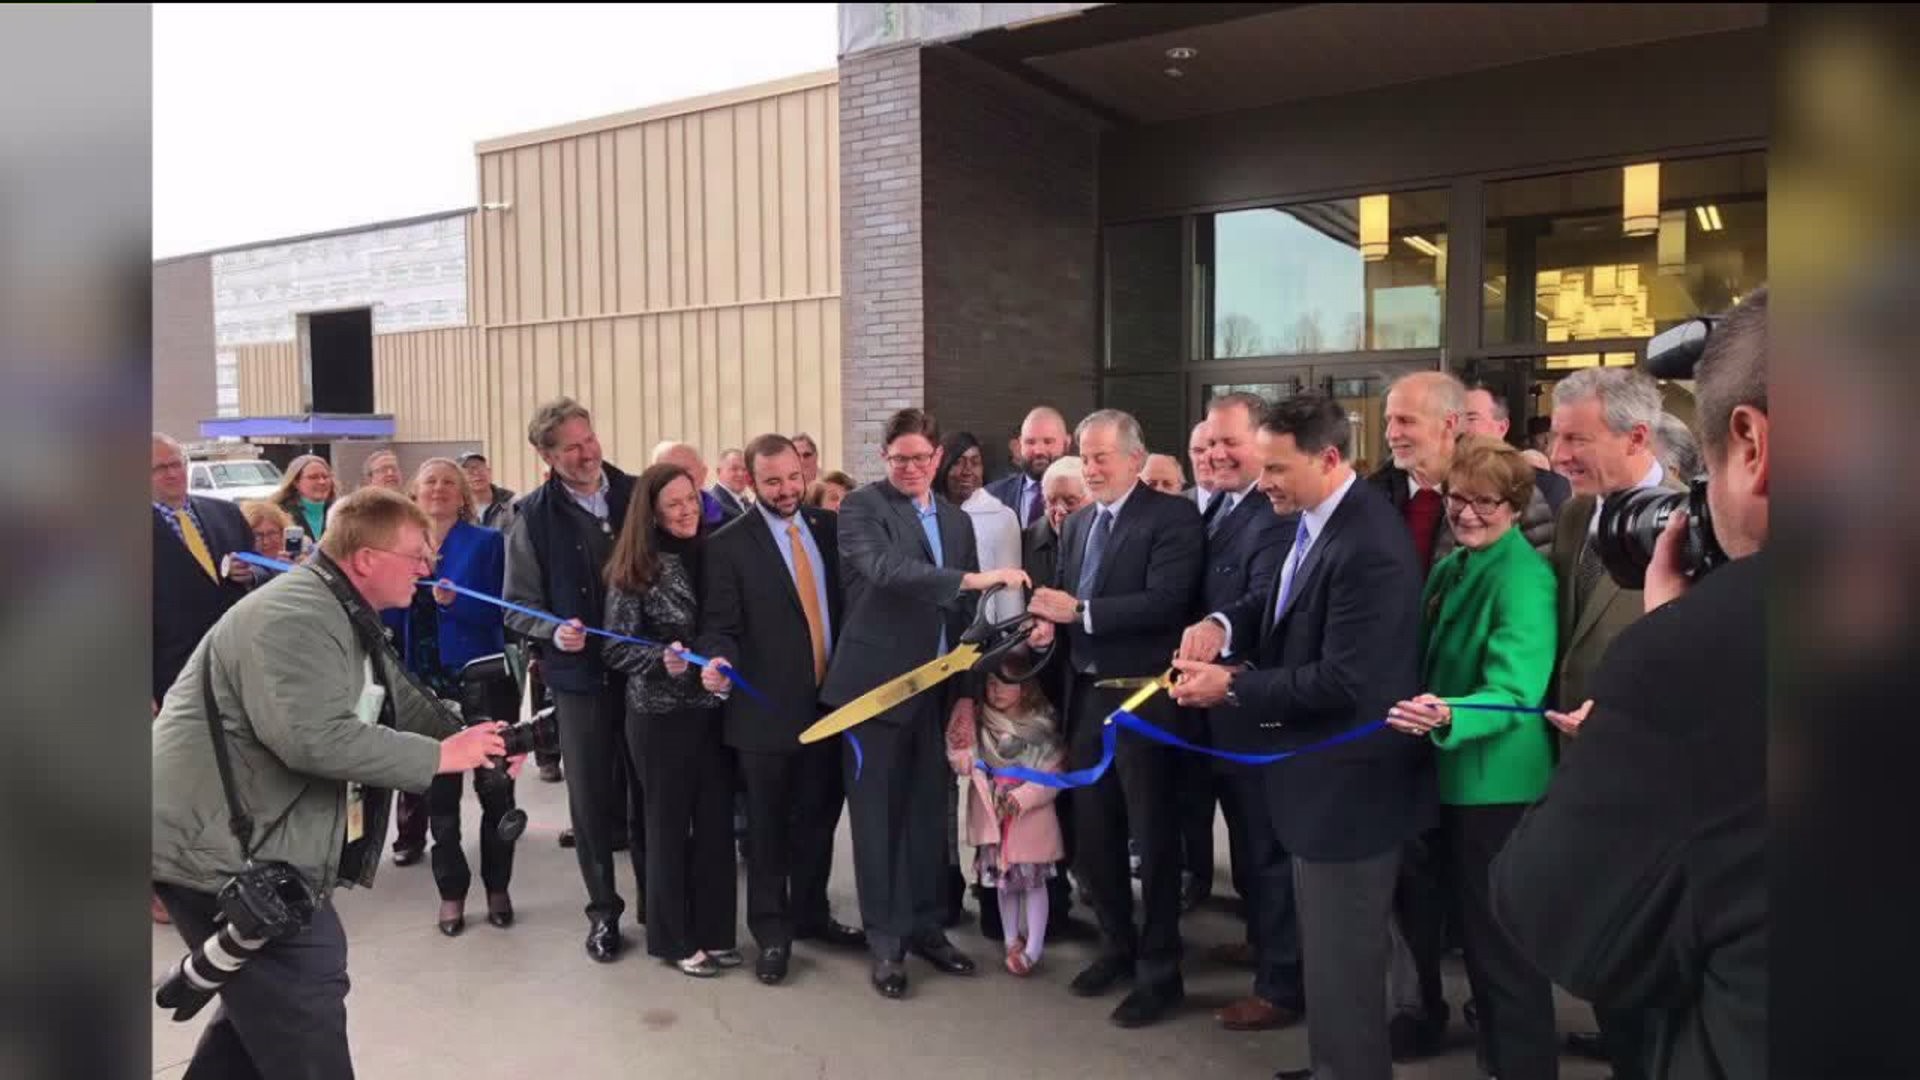 Ribbon Cutting for New JCC in Luzerne County